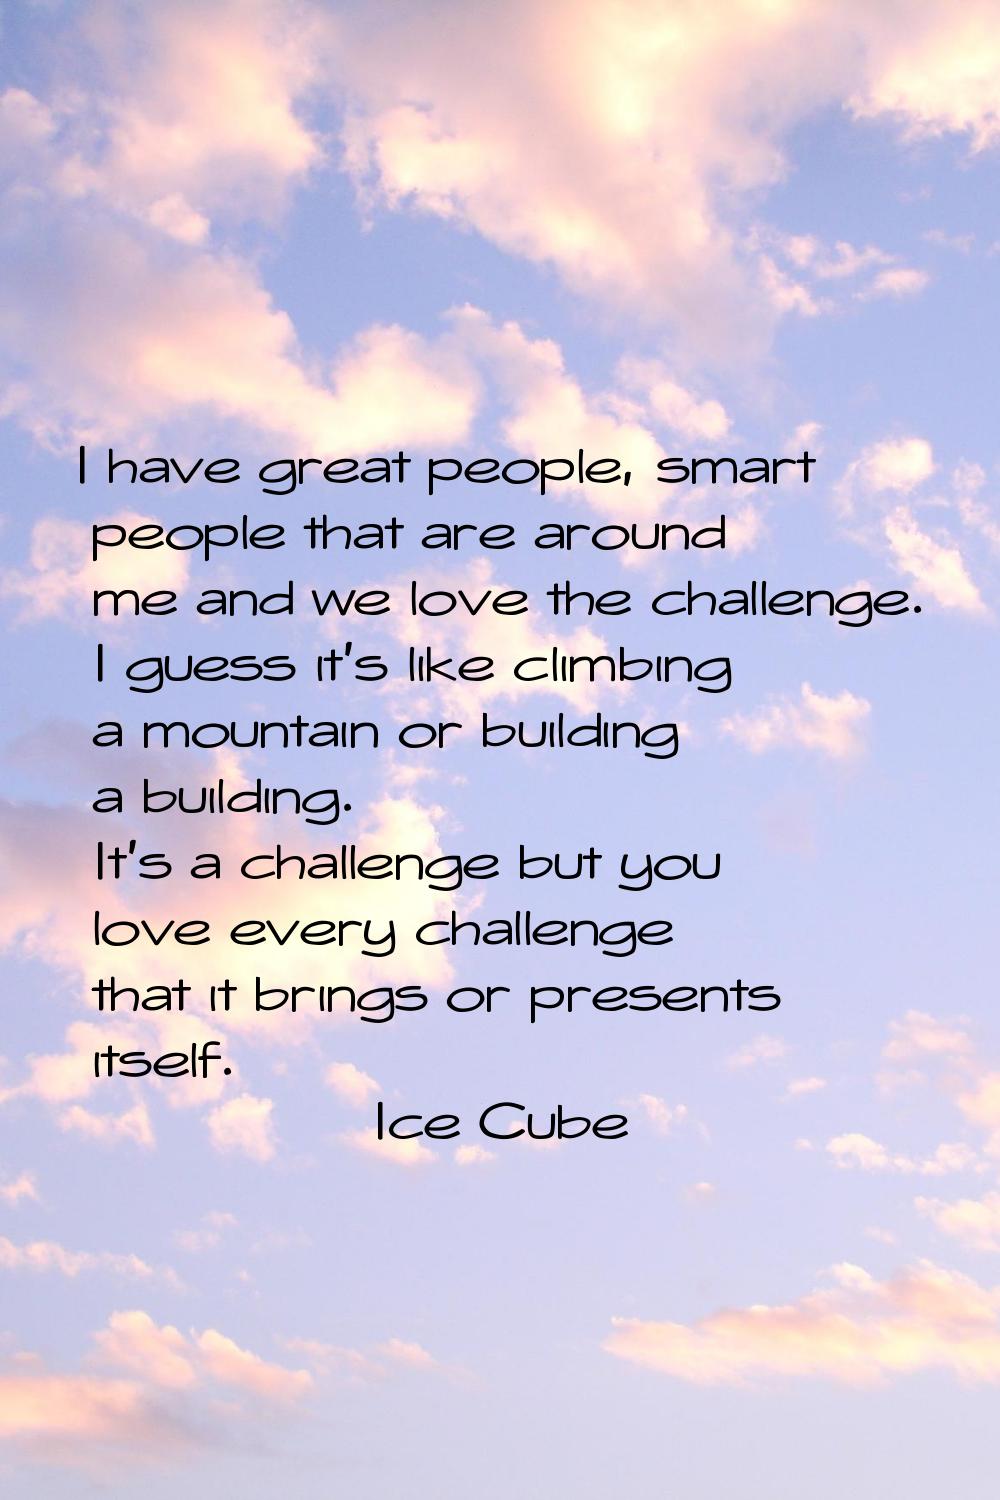 I have great people, smart people that are around me and we love the challenge. I guess it's like c